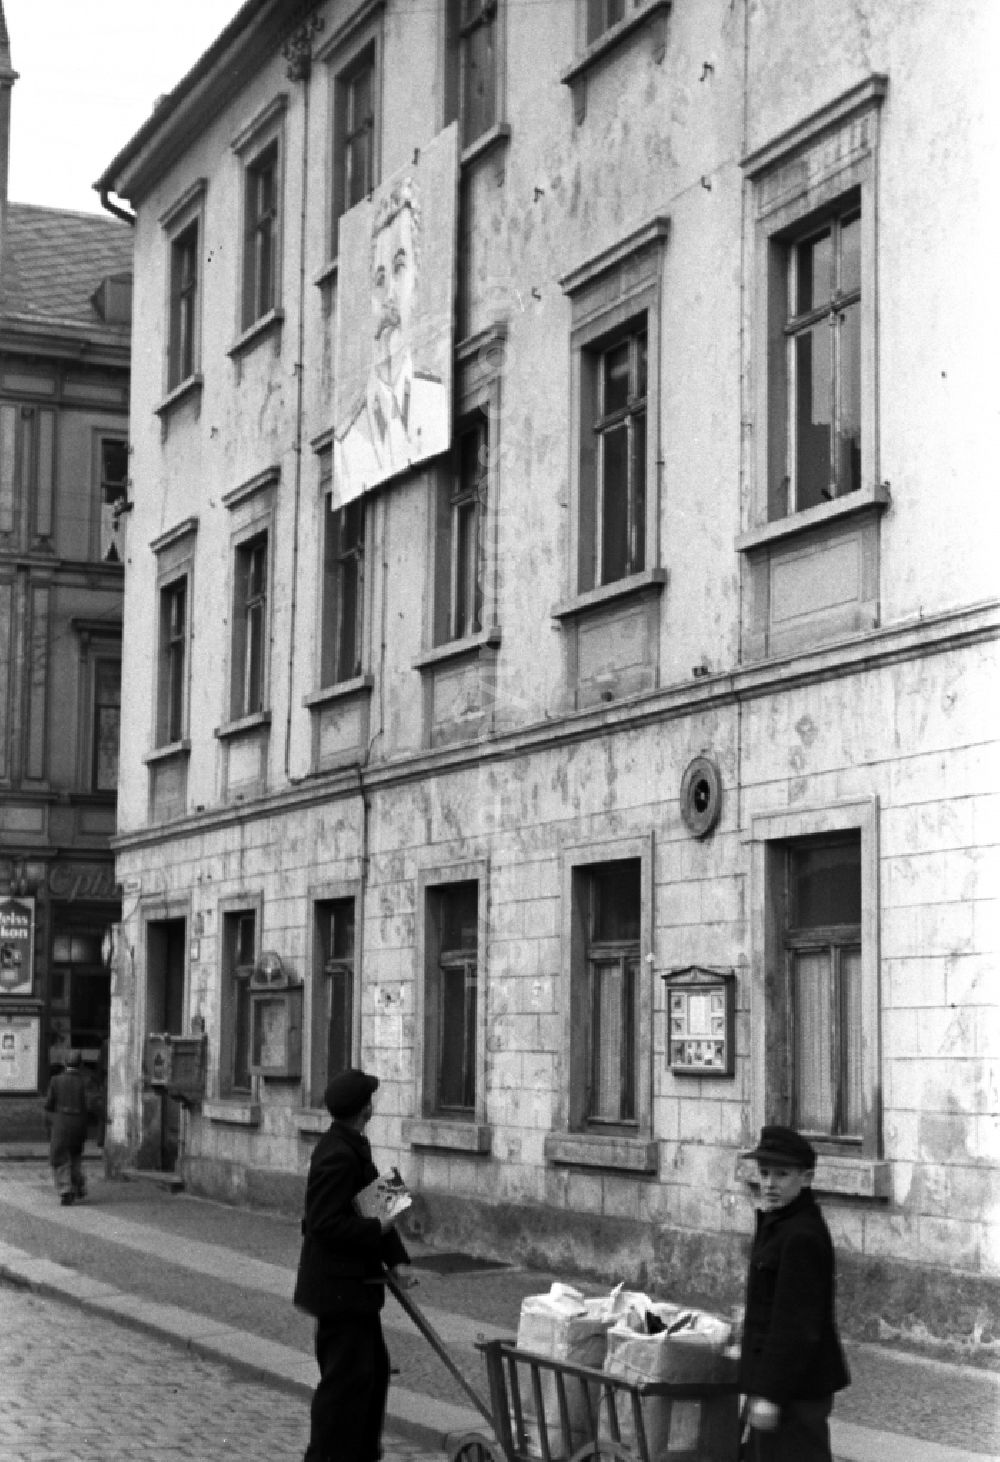 GDR photo archive: Döbeln - Drawing in the portrait of Josef Wissarionovich Stalin on a house facade in Doebeln, Saxony on the territory of the former GDR, German Democratic Republic